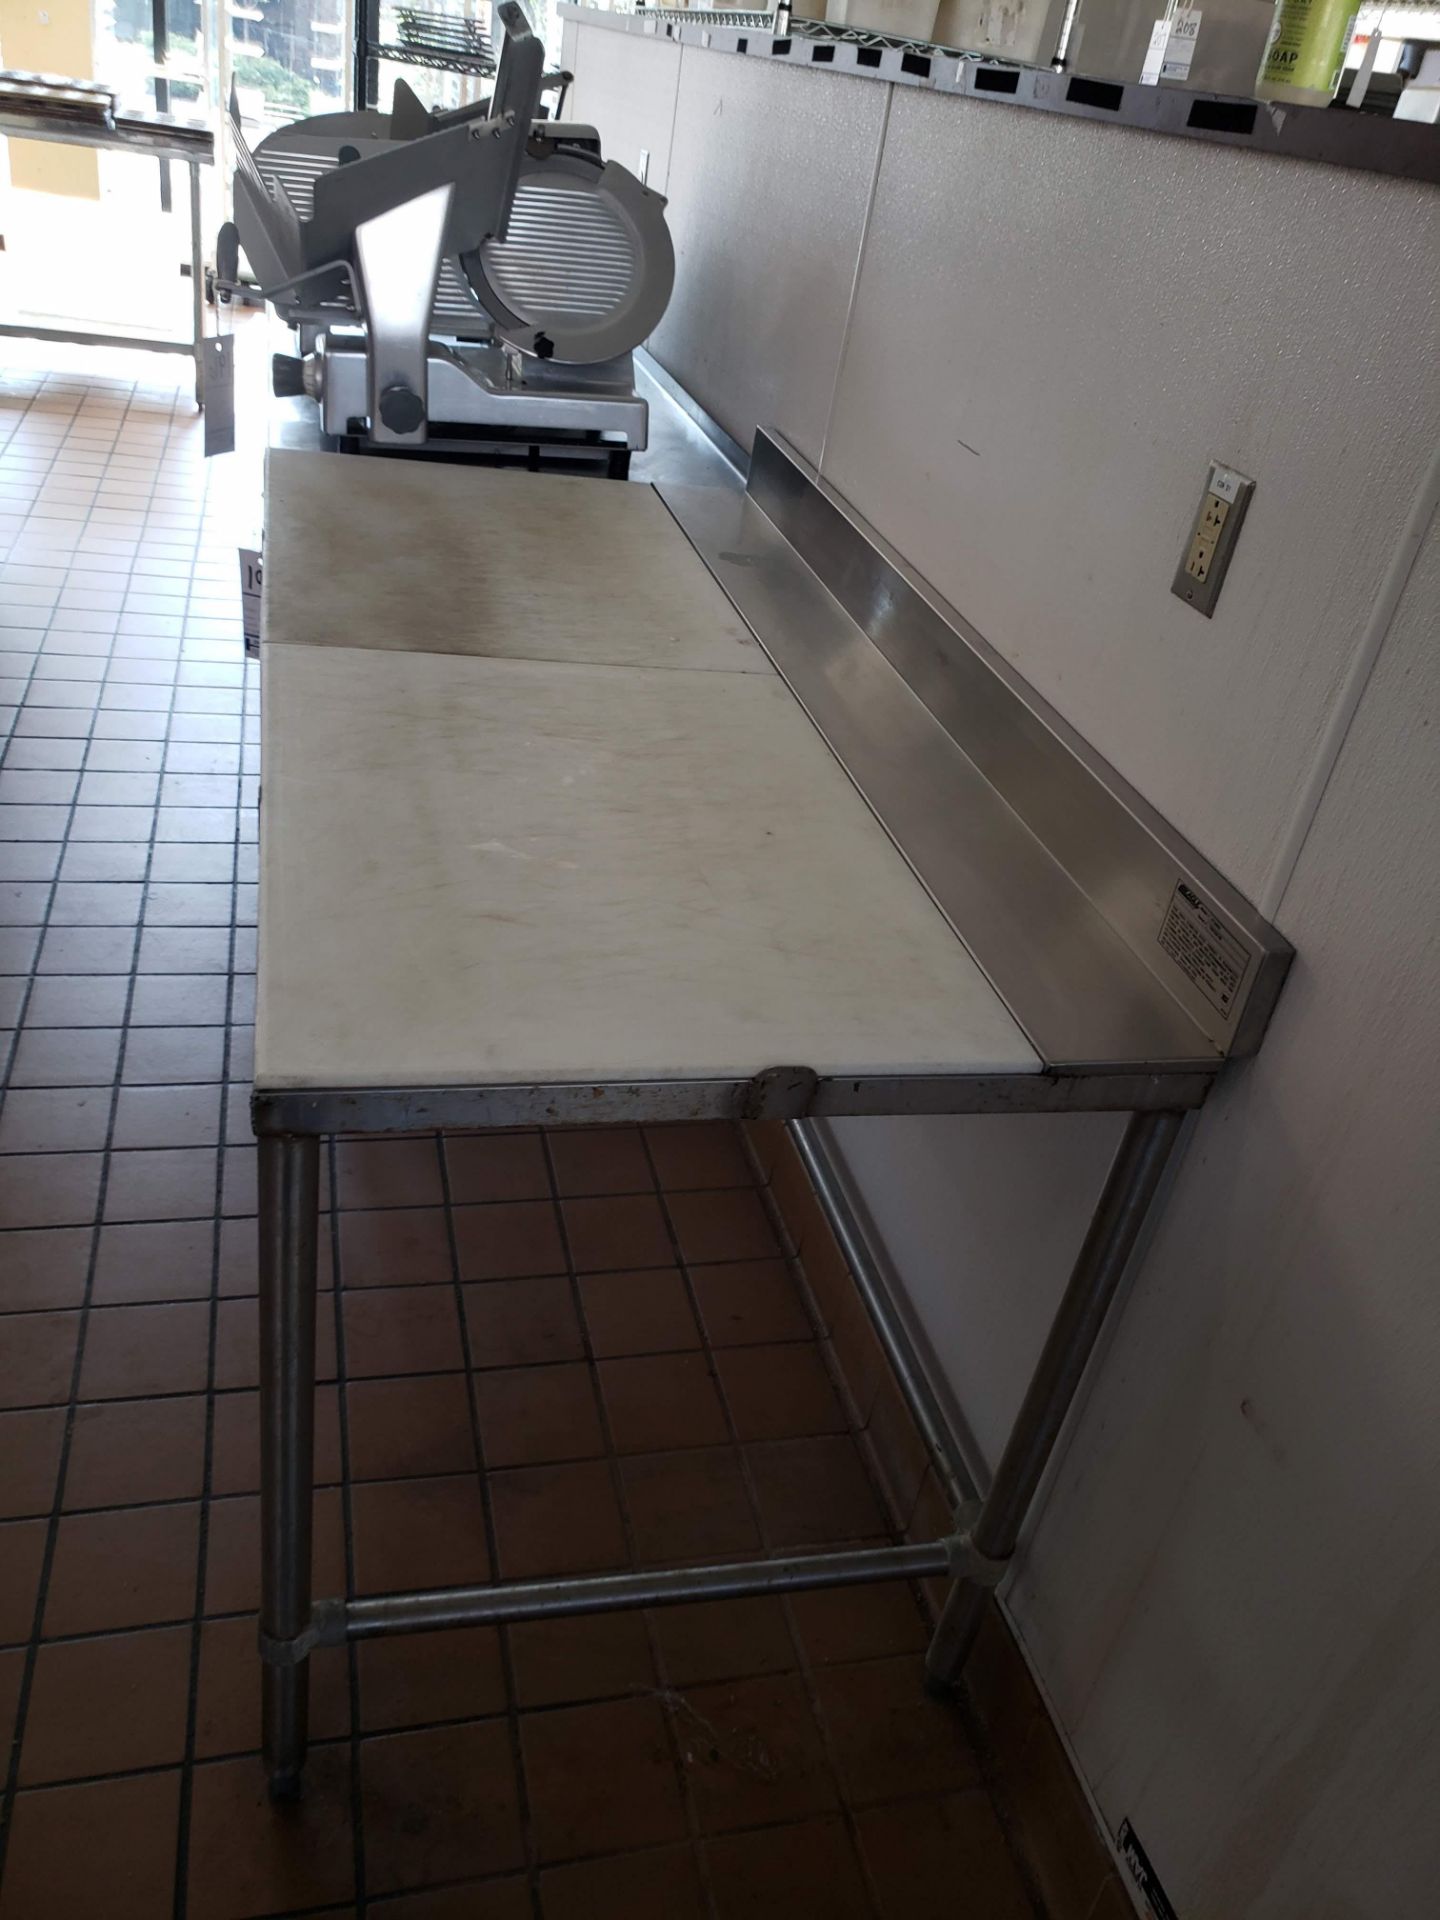 EAGLE STEAINLESS STEEL PREP TABLE WITH CUTTING BOARD TOP - MODEL BT30605 - 5' X 29" - Image 3 of 3